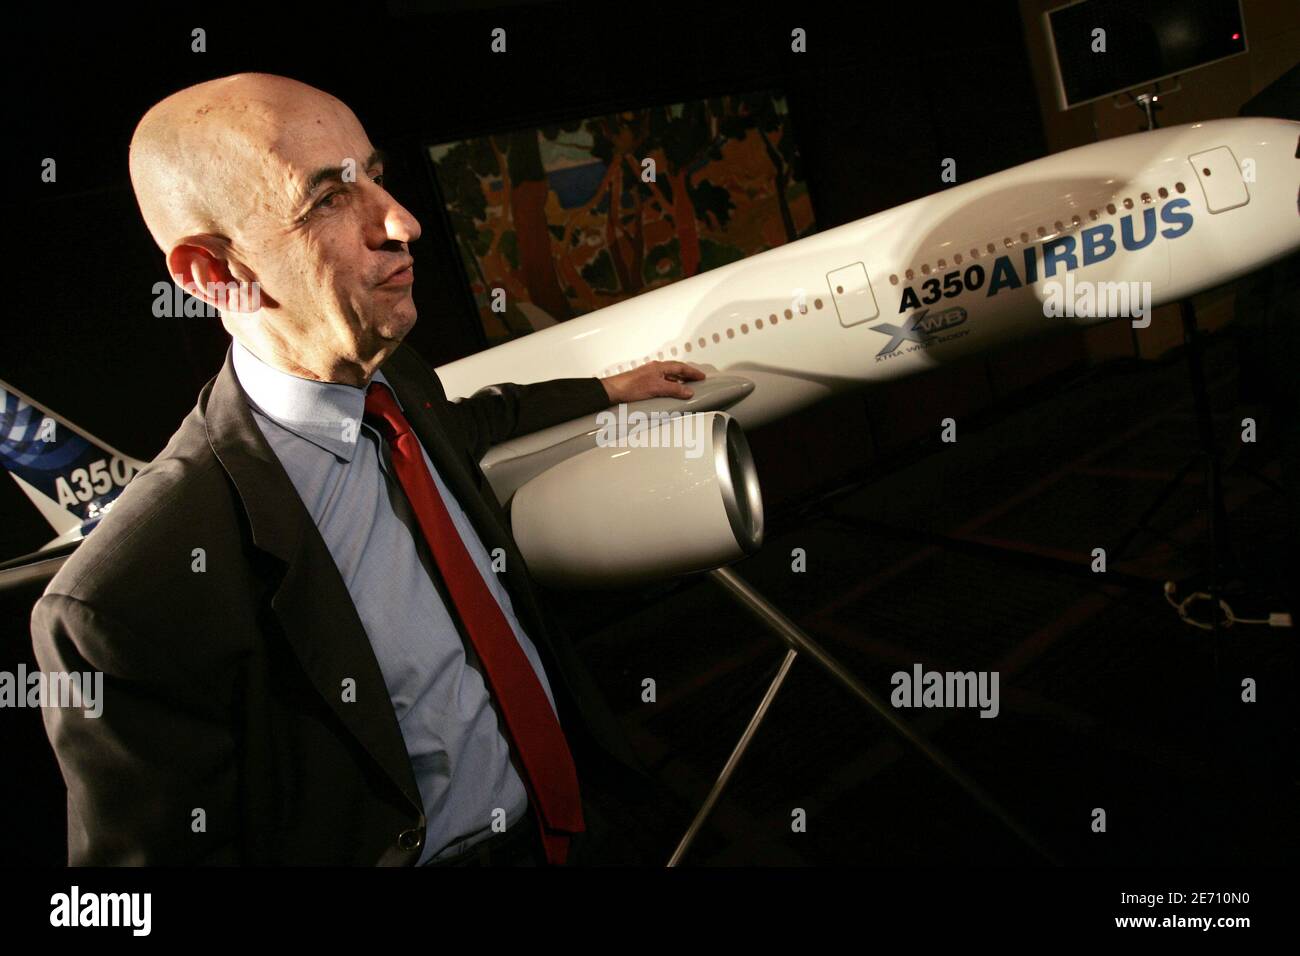 Airbus chairman Louis Gallois gives a press conference in Paris, France, on January 17, 2007. The European aircraft maker delivered 434 planes during the year, 36 more than its U.S. based rival to remain the number one commercial jet maker for the fourth straight year. Photo by Thibault Camus/ABACAPRESS.COM Stock Photo